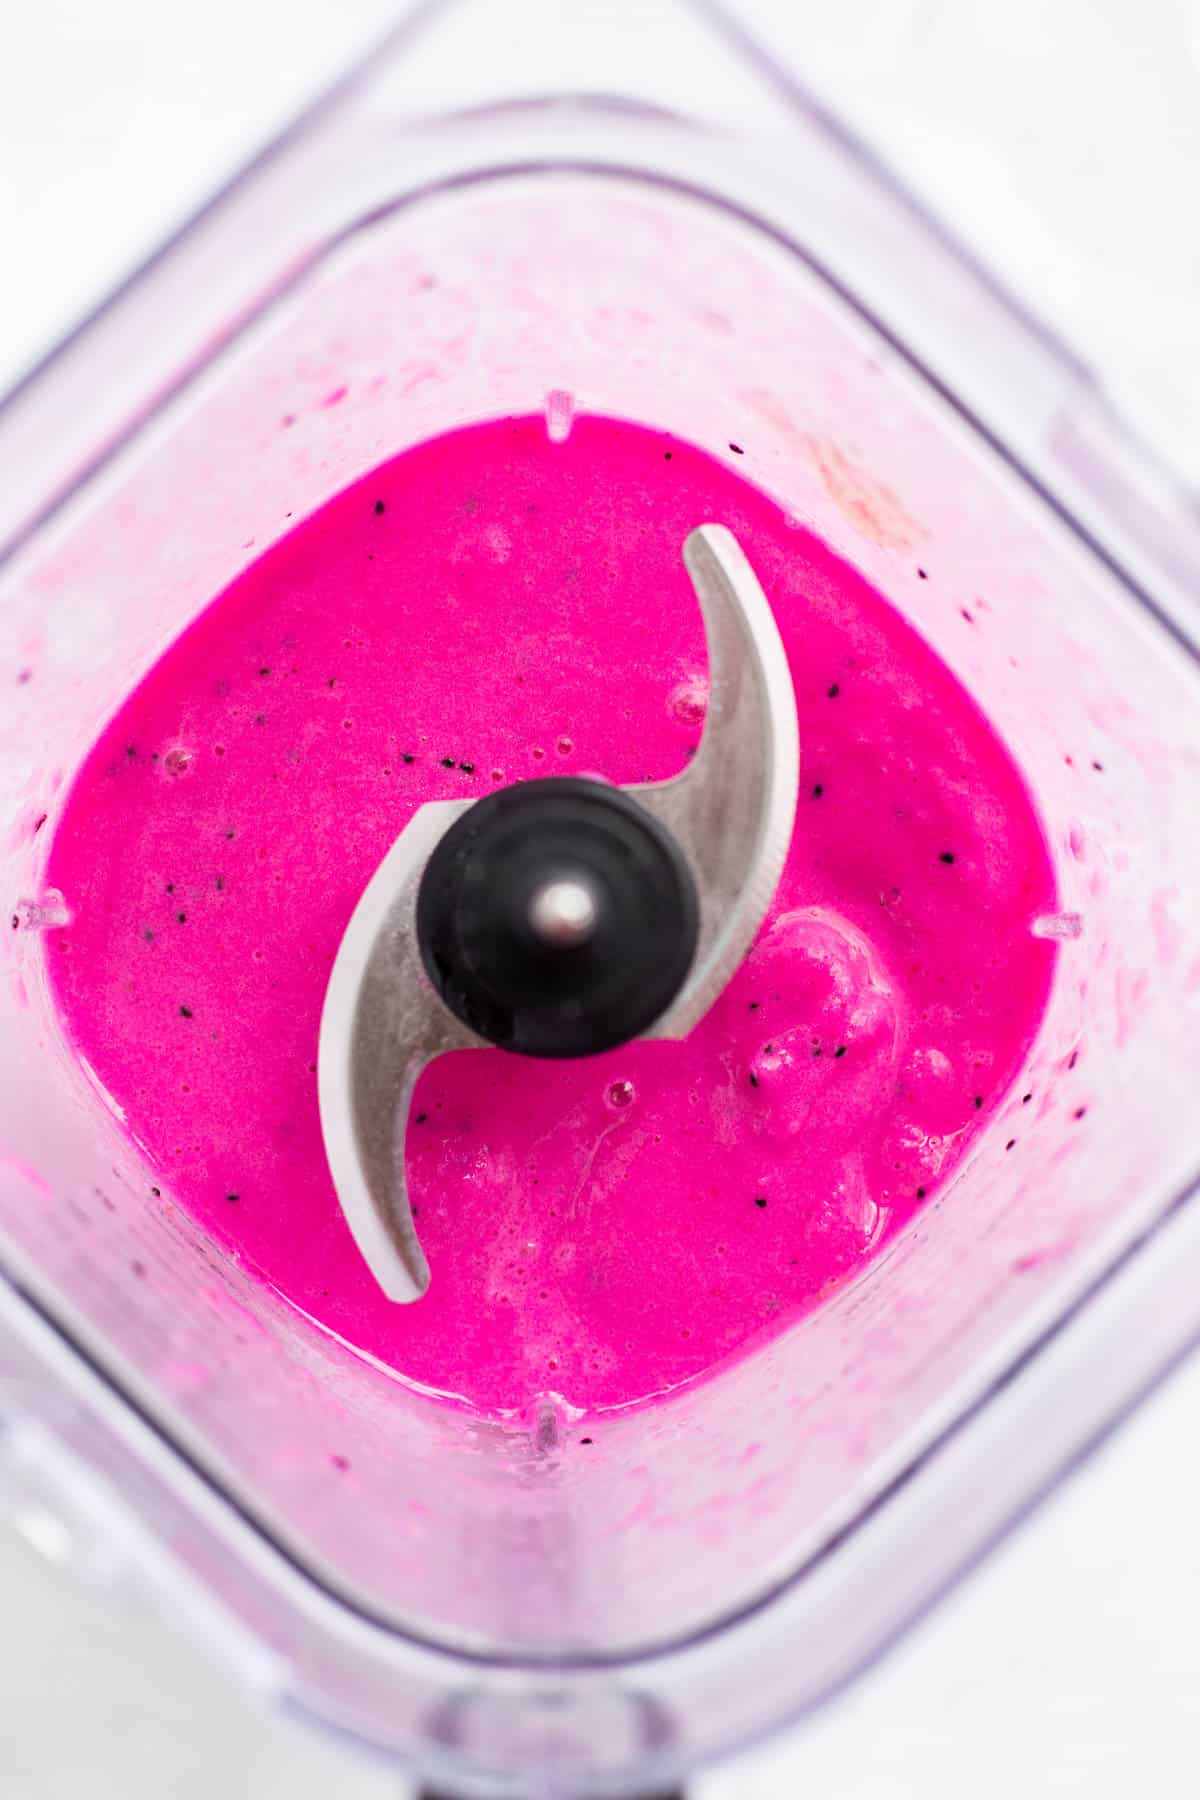 creamy pitaya smoothie in a blender cup with the blade.